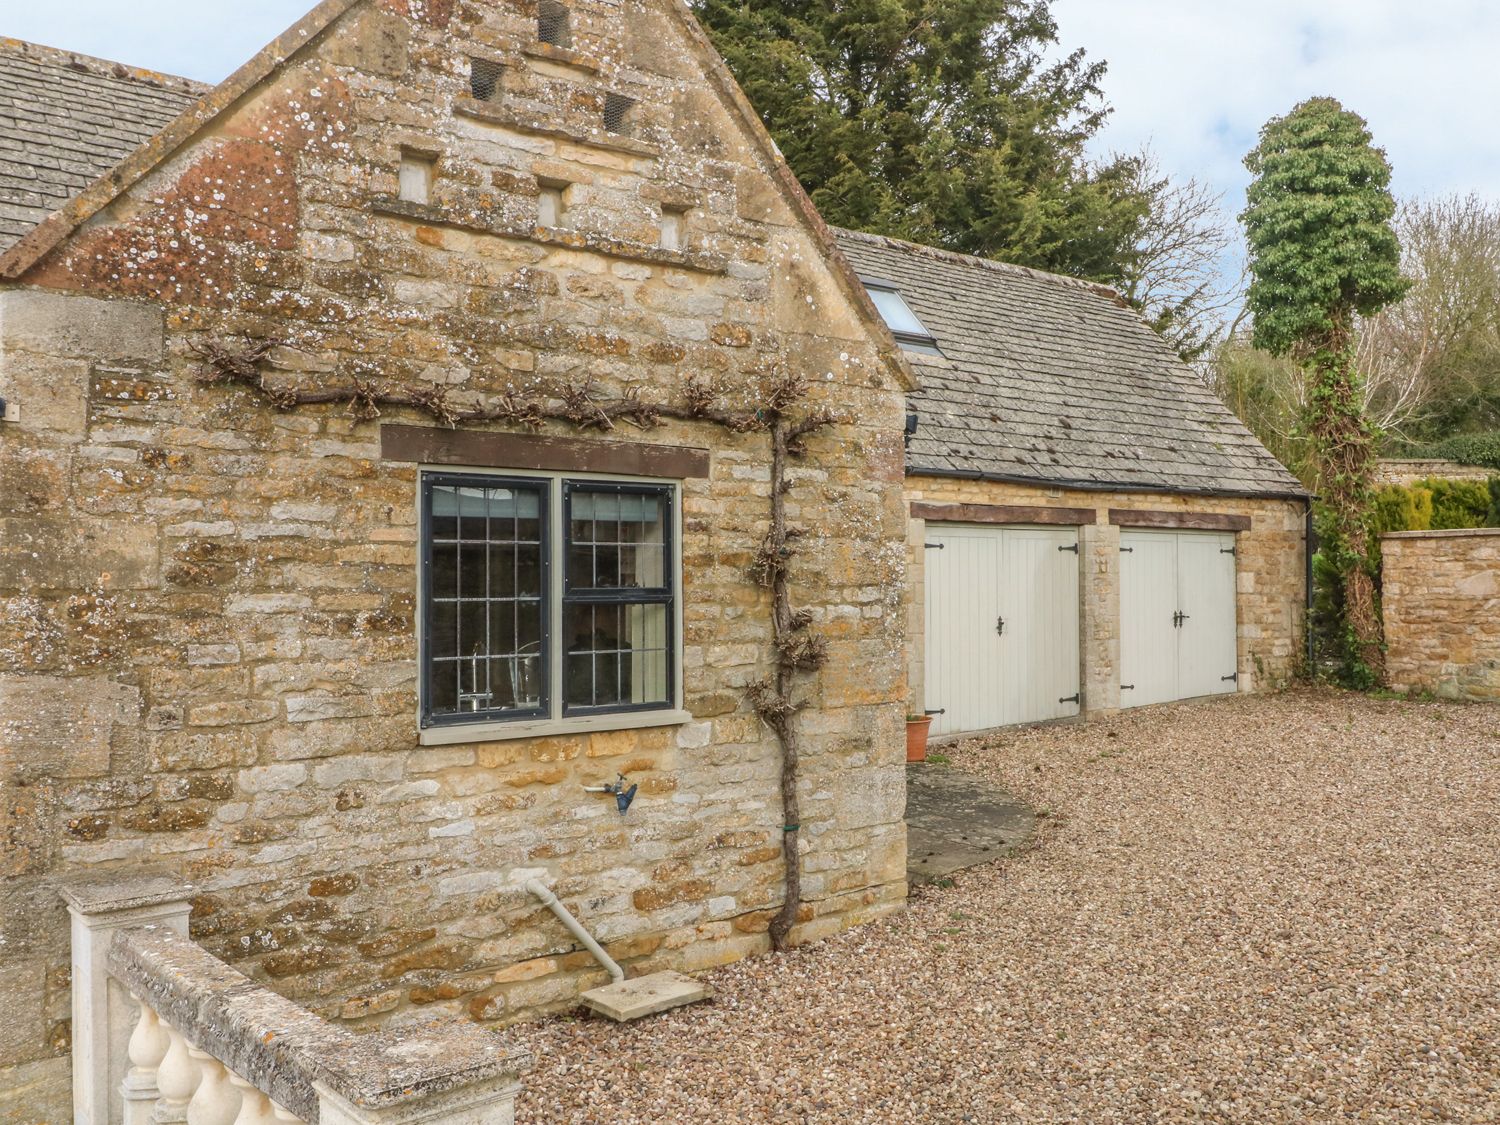 The Court Yard Cottage - Cotswolds - 988782 - photo 1